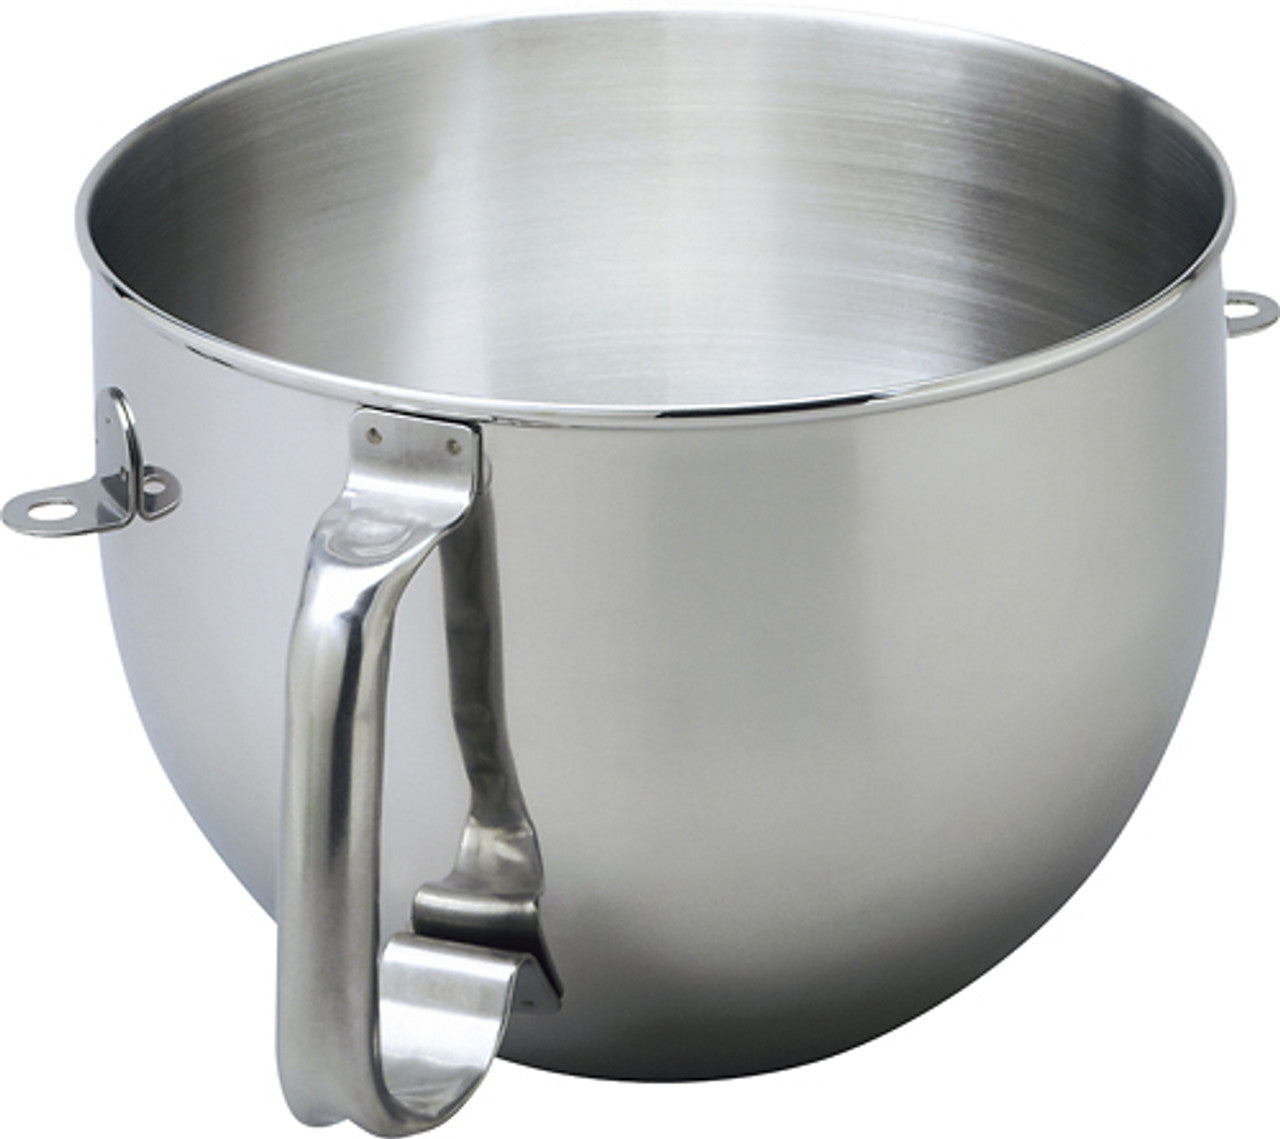 KitchenAid 6 Quart Bowl-Lift Polished Stainless Steel Bowl with Comfortable Handle